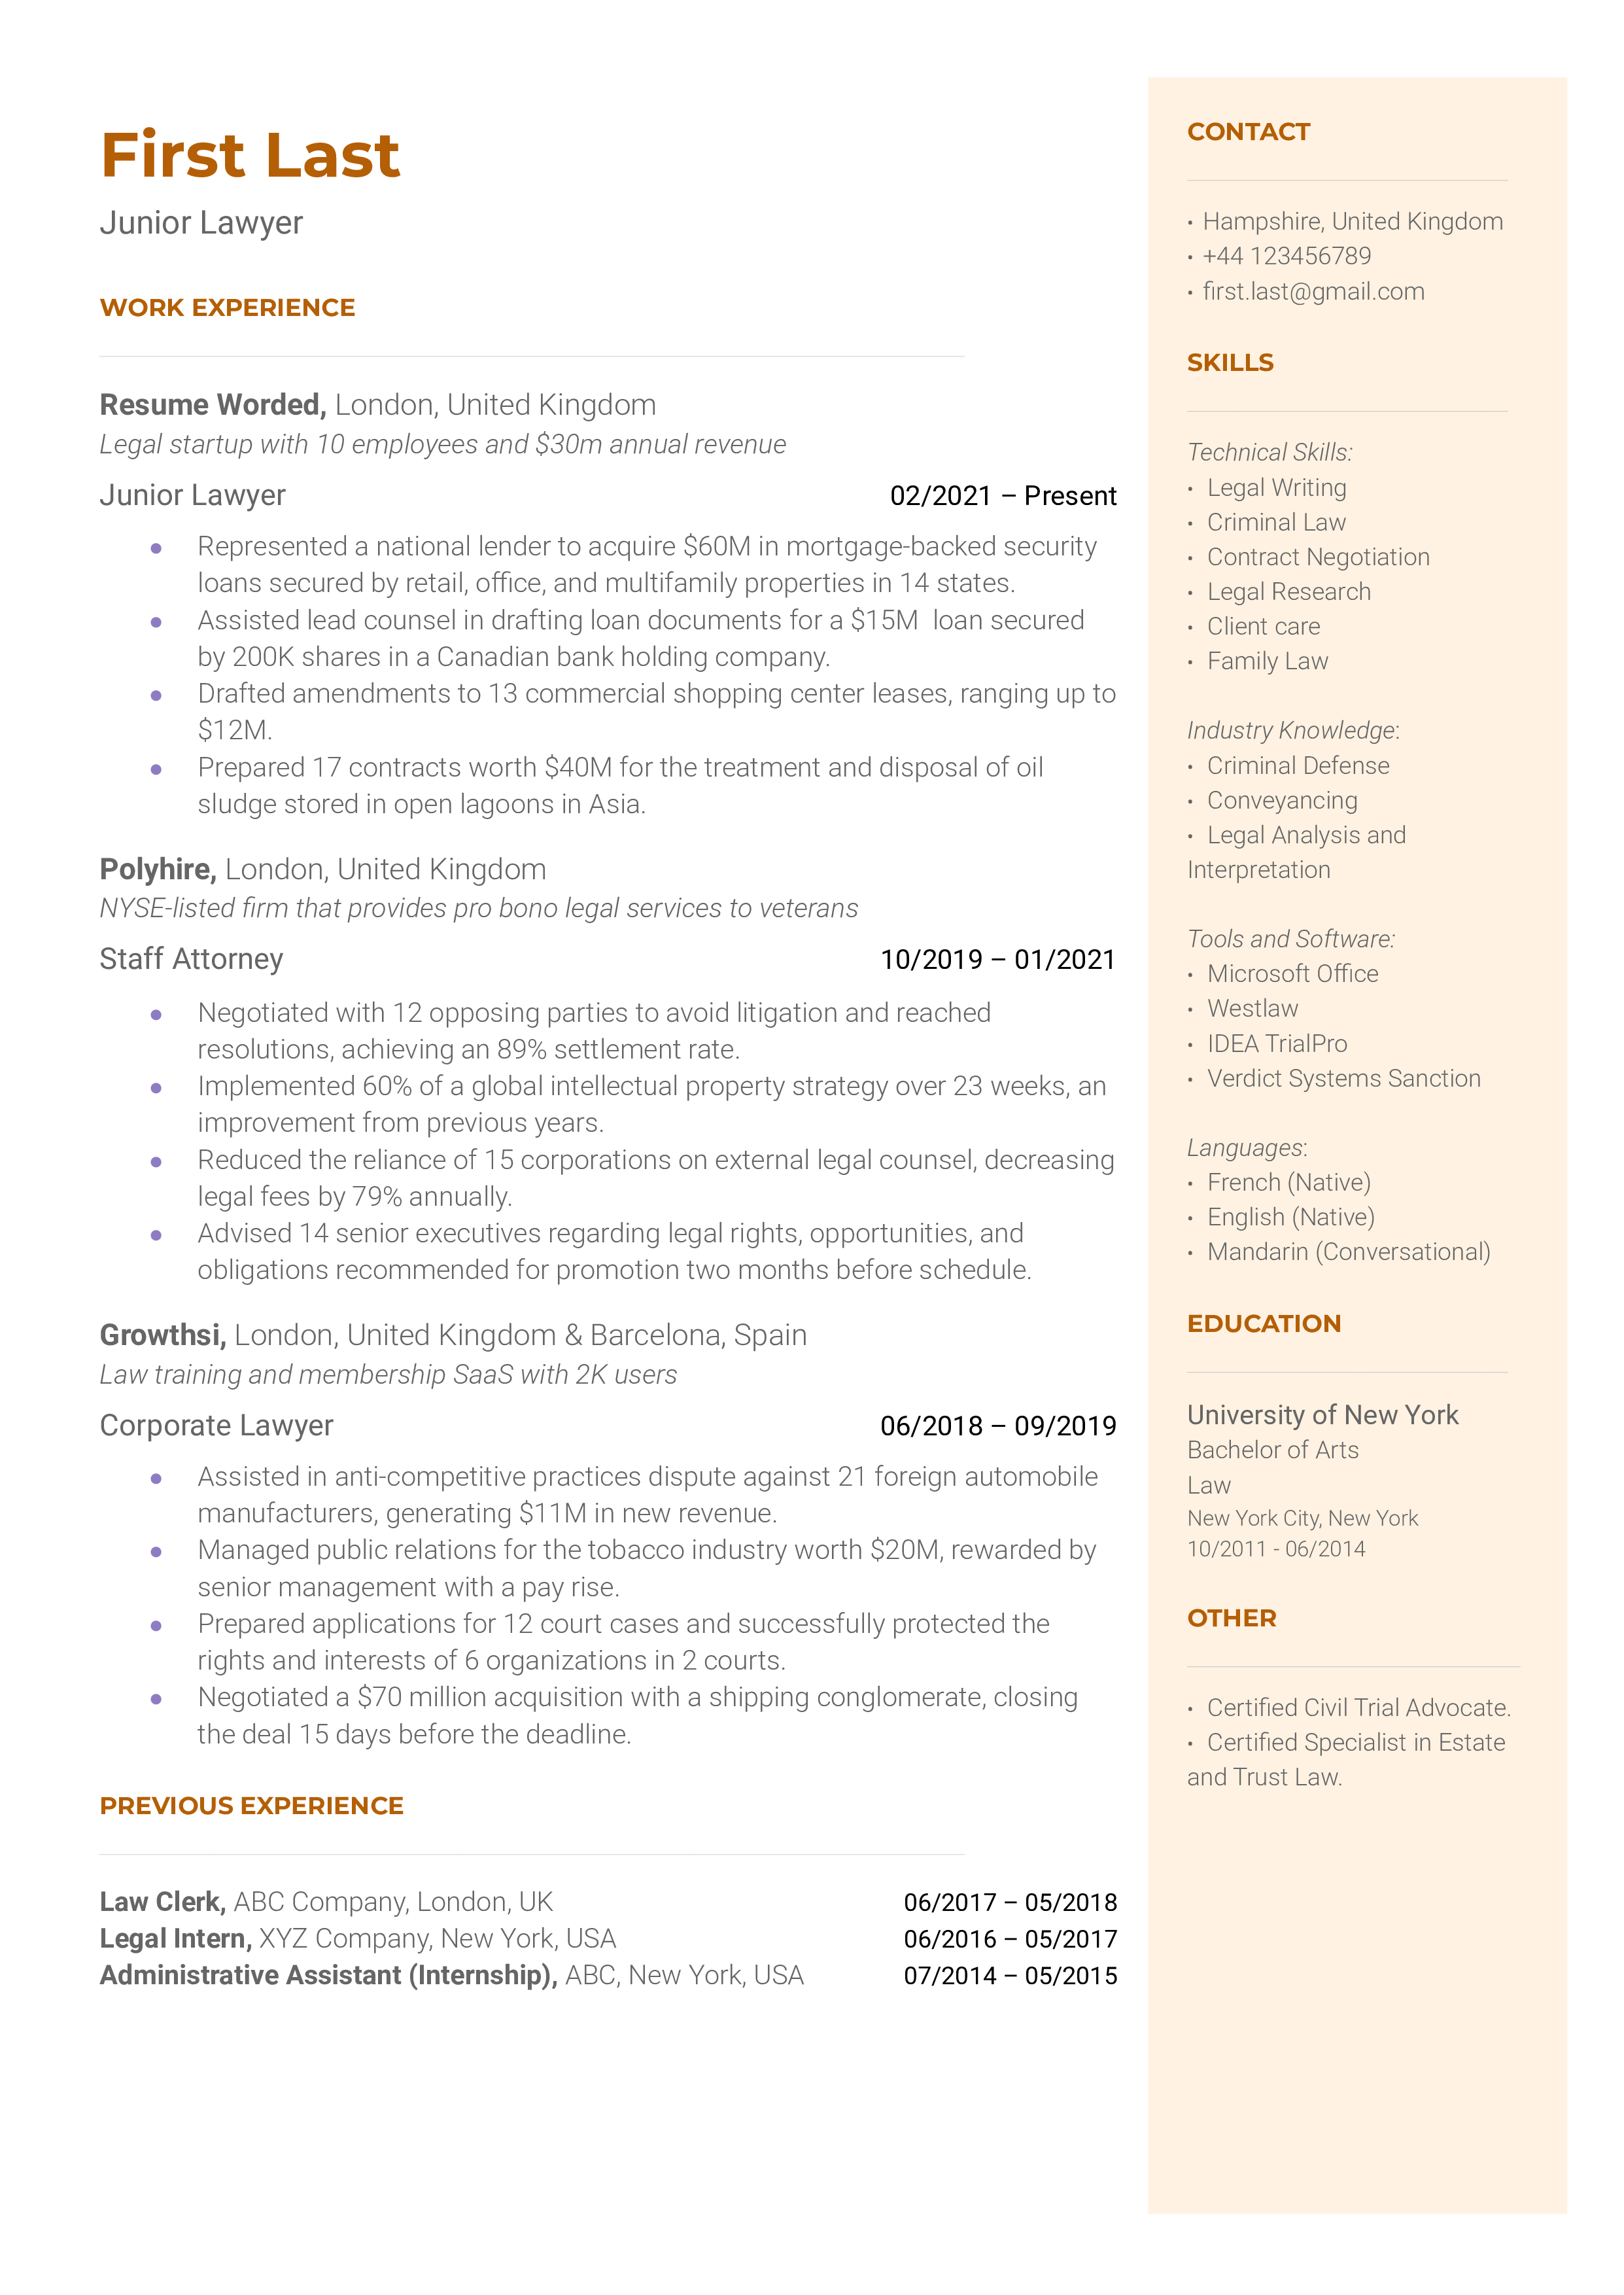 A junior lawyer's CV showcasing their case management skills and proficiency in legal technology.